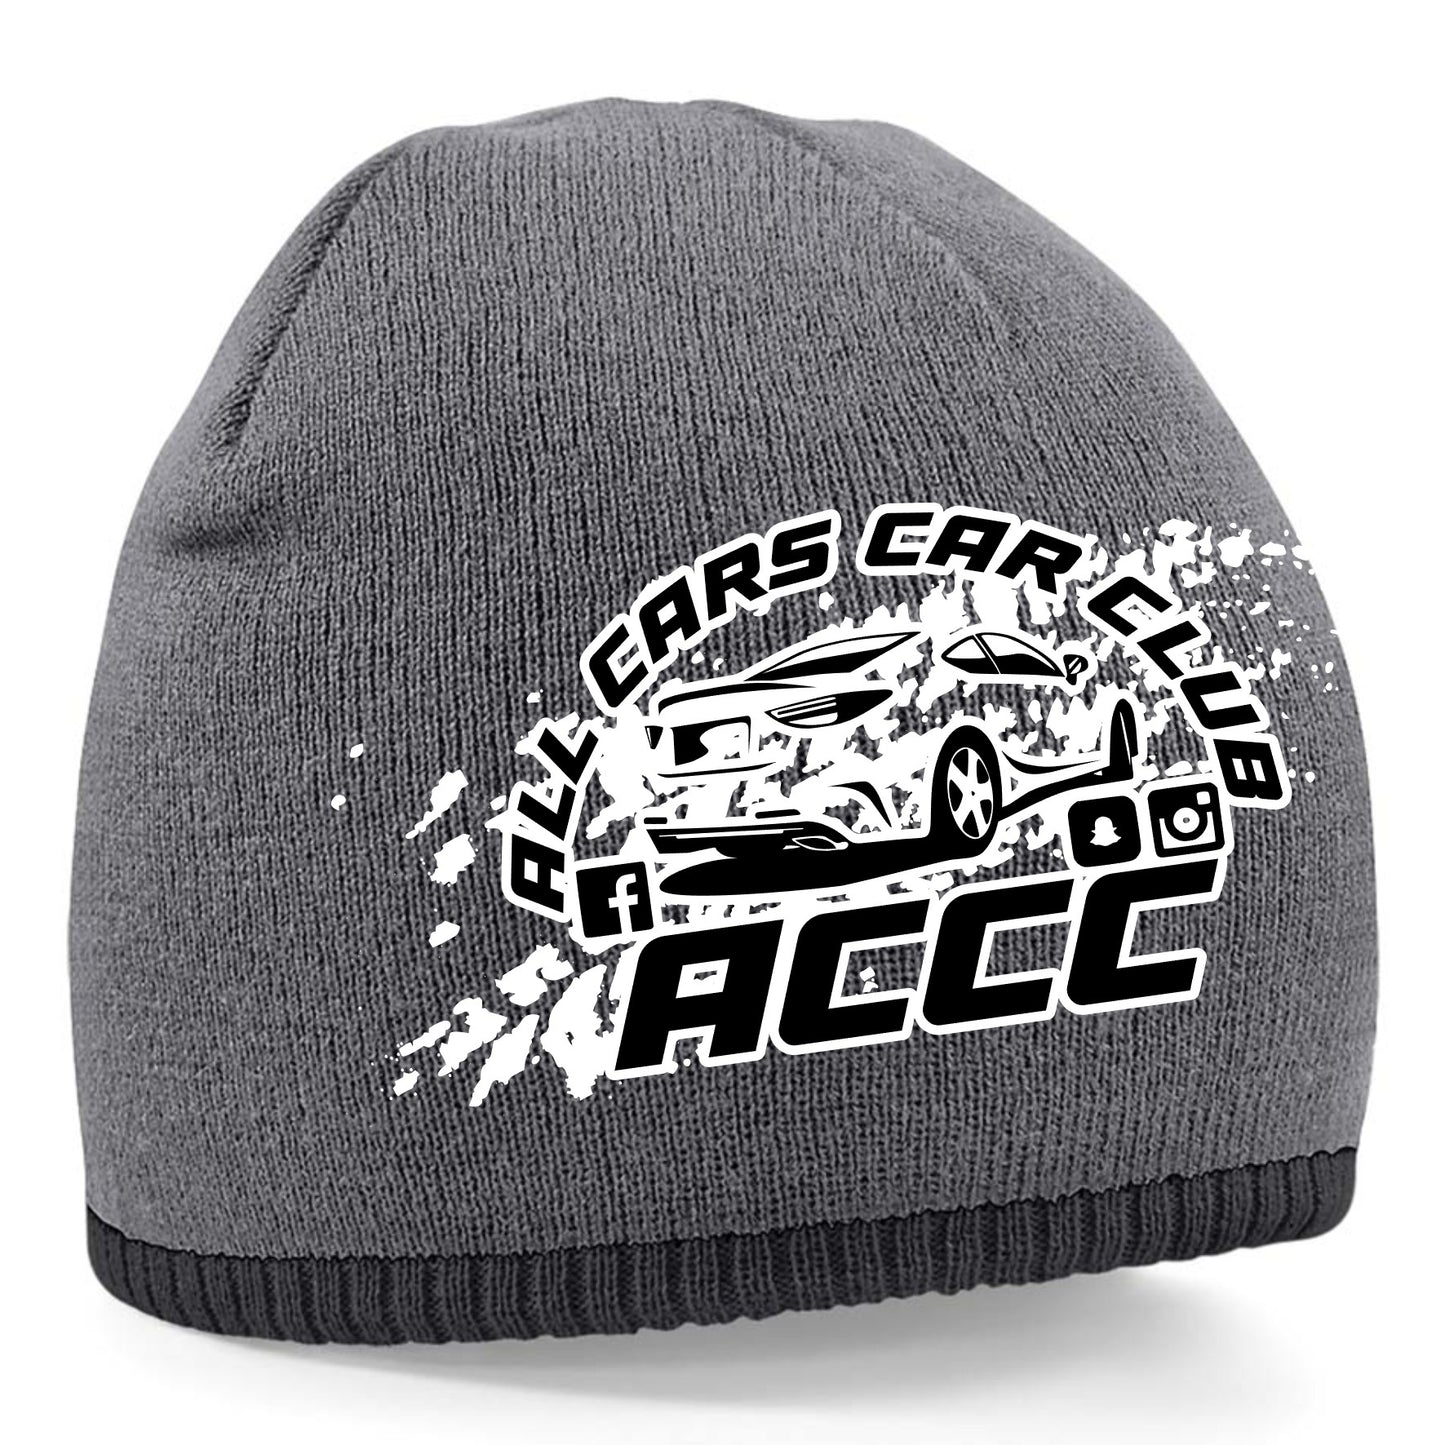 ACCC RIMMED BEANIE - COLOUR-OPTIONS AVAILABLE (BB44C)